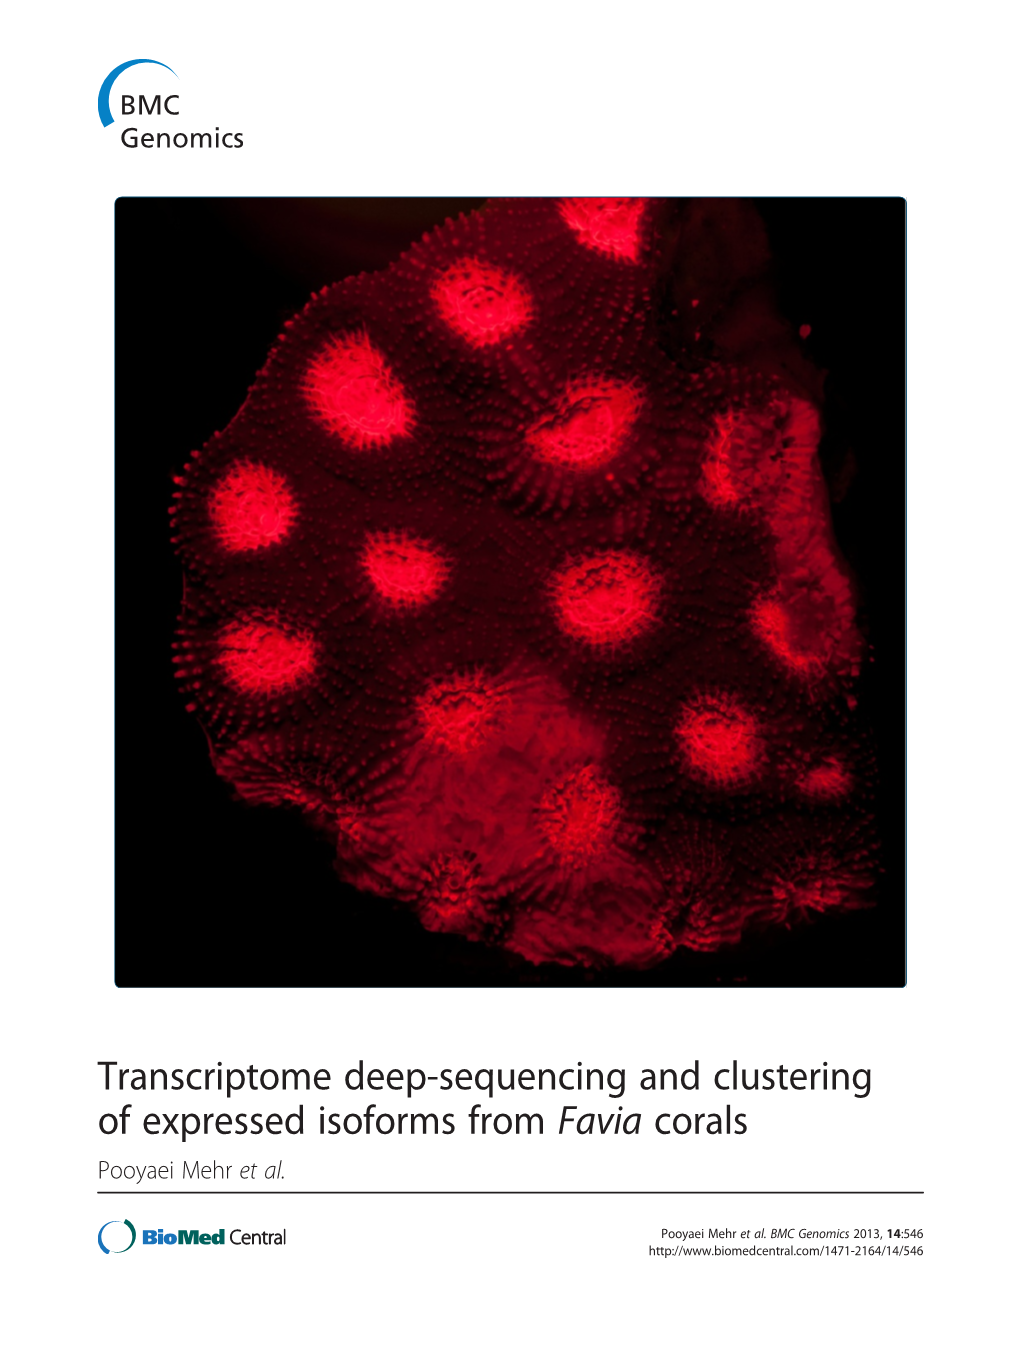 Transcriptome Deep-Sequencing and Clustering of Expressed Isoforms from Favia Corals Pooyaei Mehr Et Al